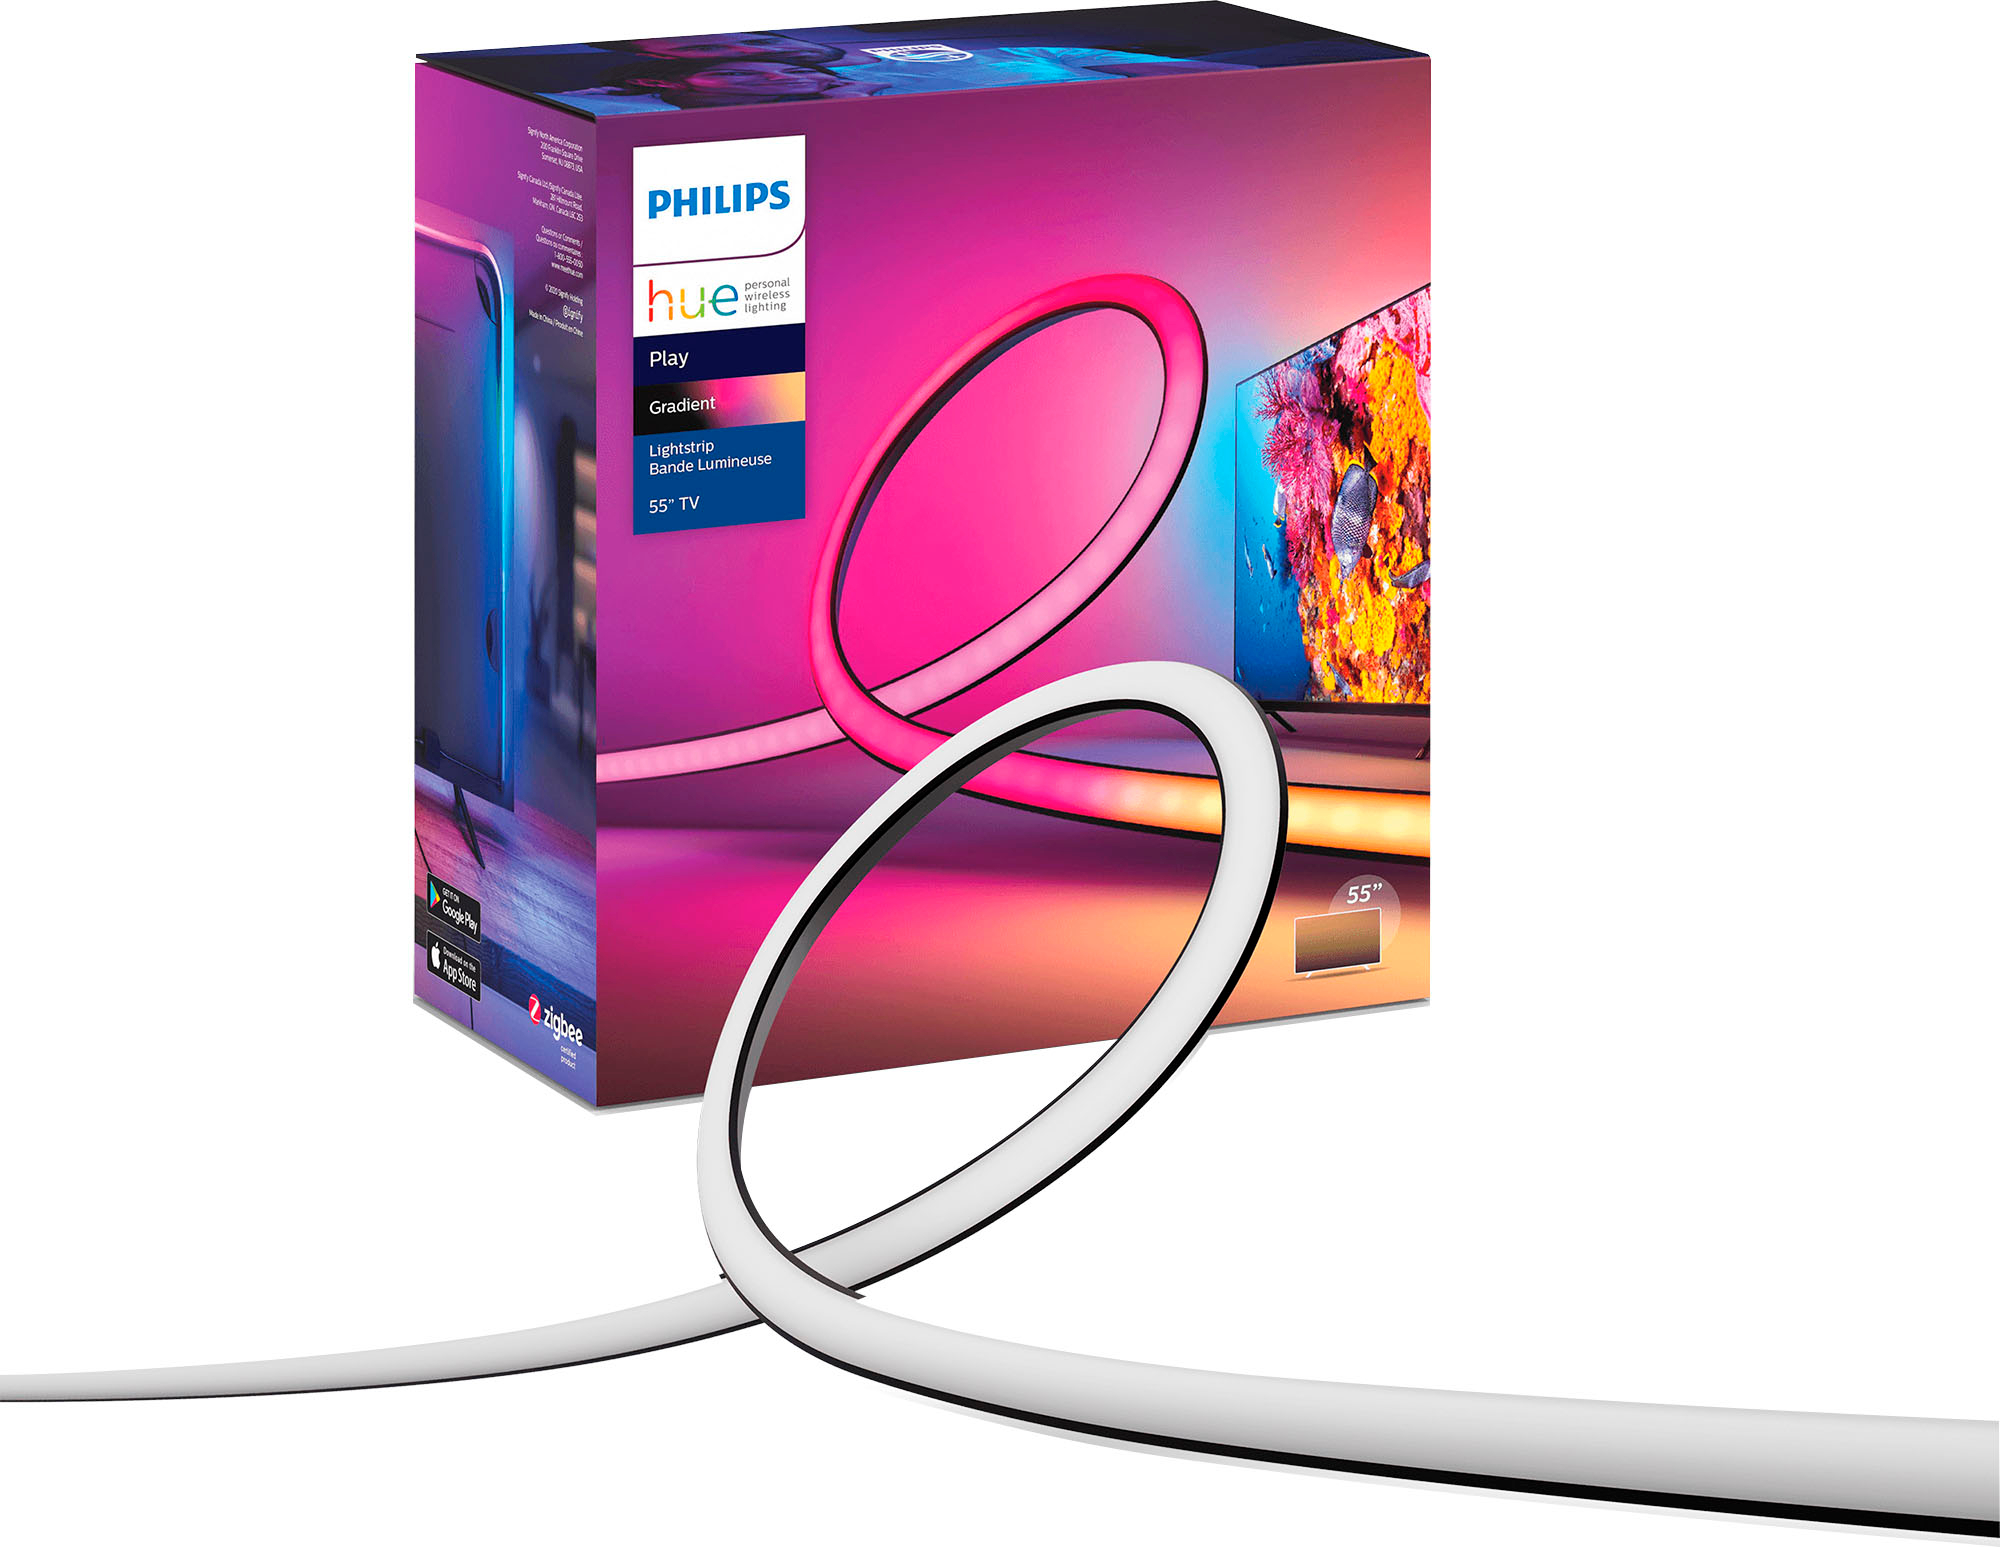 Philips Hue Play 560409 Gradient Color Lightstrip for 55" TV OPEN BOX 